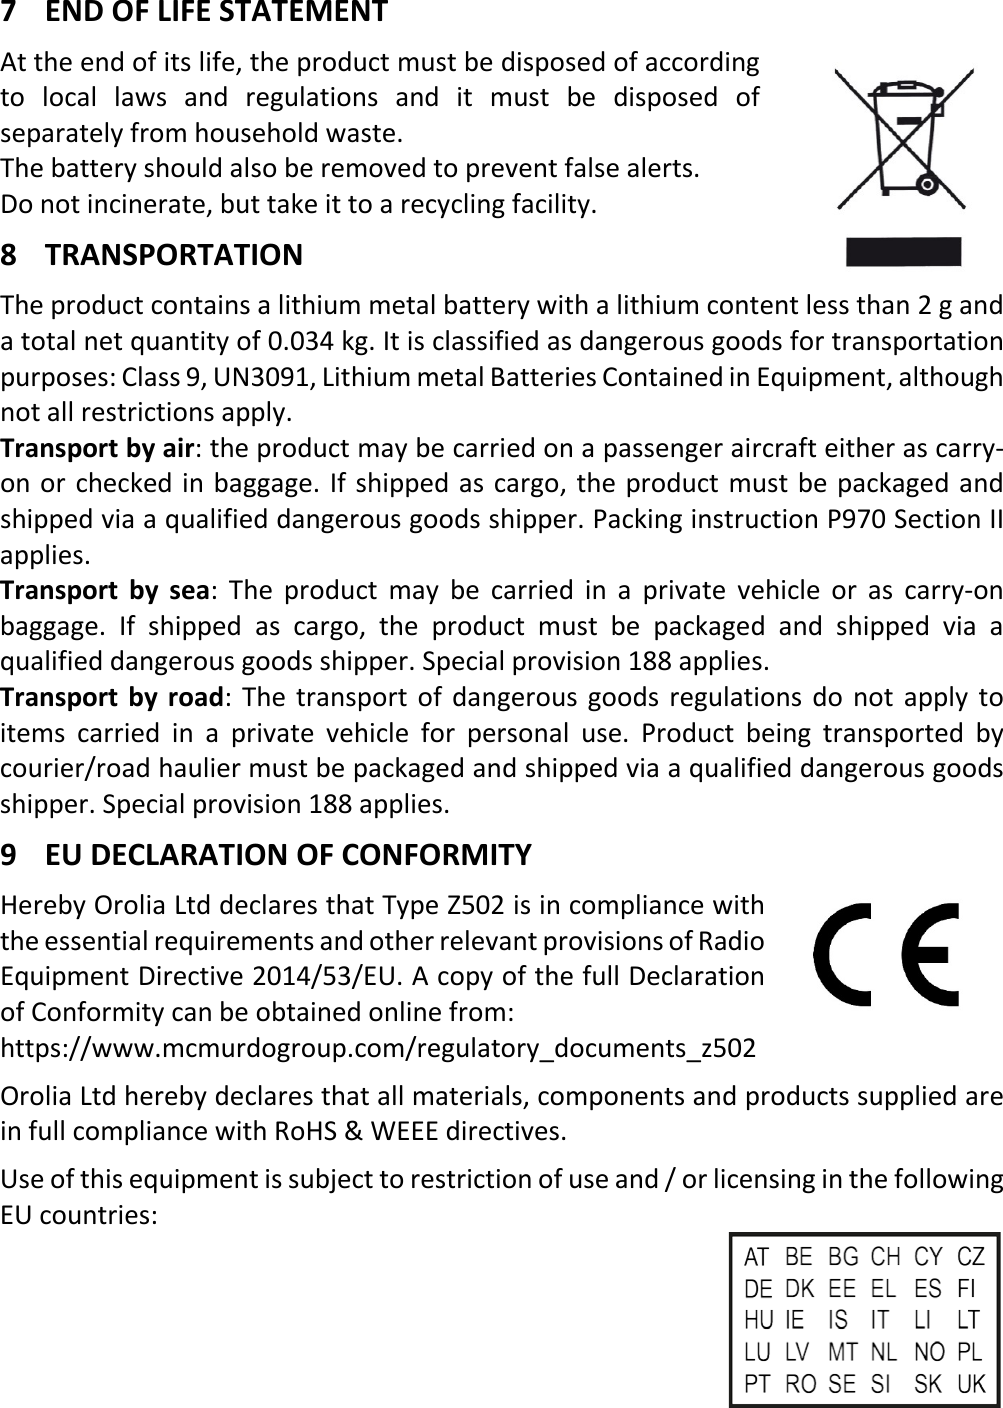   EN 7 X 7 END OF LIFE STATEMENT At the end of its life, the product must be disposed of according to local laws and regulations and it must be disposed of separately from household waste. The battery should also be removed to prevent false alerts. Do not incinerate, but take it to a recycling facility. 8 TRANSPORTATION The product contains a lithium metal battery with a lithium content less than 2 g and a total net quantity of 0.034 kg. It is classified as dangerous goods for transportation purposes: Class 9, UN3091, Lithium metal Batteries Contained in Equipment, although not all restrictions apply. Transport by air: the product may be carried on a passenger aircraft either as carry-on or checked in baggage. If shipped as cargo, the product must be packaged and shipped via a qualified dangerous goods shipper. Packing instruction P970 Section II applies. Transport by sea:  The product may be carried in a private vehicle or as carry-on baggage. If shipped as cargo, the product must be packaged and shipped via a qualified dangerous goods shipper. Special provision 188 applies. Transport by road: The transport of dangerous goods regulations do not apply to items carried in a private vehicle for personal use. Product being transported by courier/road haulier must be packaged and shipped via a qualified dangerous goods shipper. Special provision 188 applies. 9 EU DECLARATION OF CONFORMITY Hereby Orolia Ltd declares that Type Z502 is in compliance with the essential requirements and other relevant provisions of Radio Equipment Directive 2014/53/EU. A copy of the full Declaration of Conformity can be obtained online from:   https://www.mcmurdogroup.com/regulatory_documents_z502 Orolia Ltd hereby declares that all materials, components and products supplied are in full compliance with RoHS &amp; WEEE directives. Use of this equipment is subject to restriction of use and / or licensing in the following EU countries:      